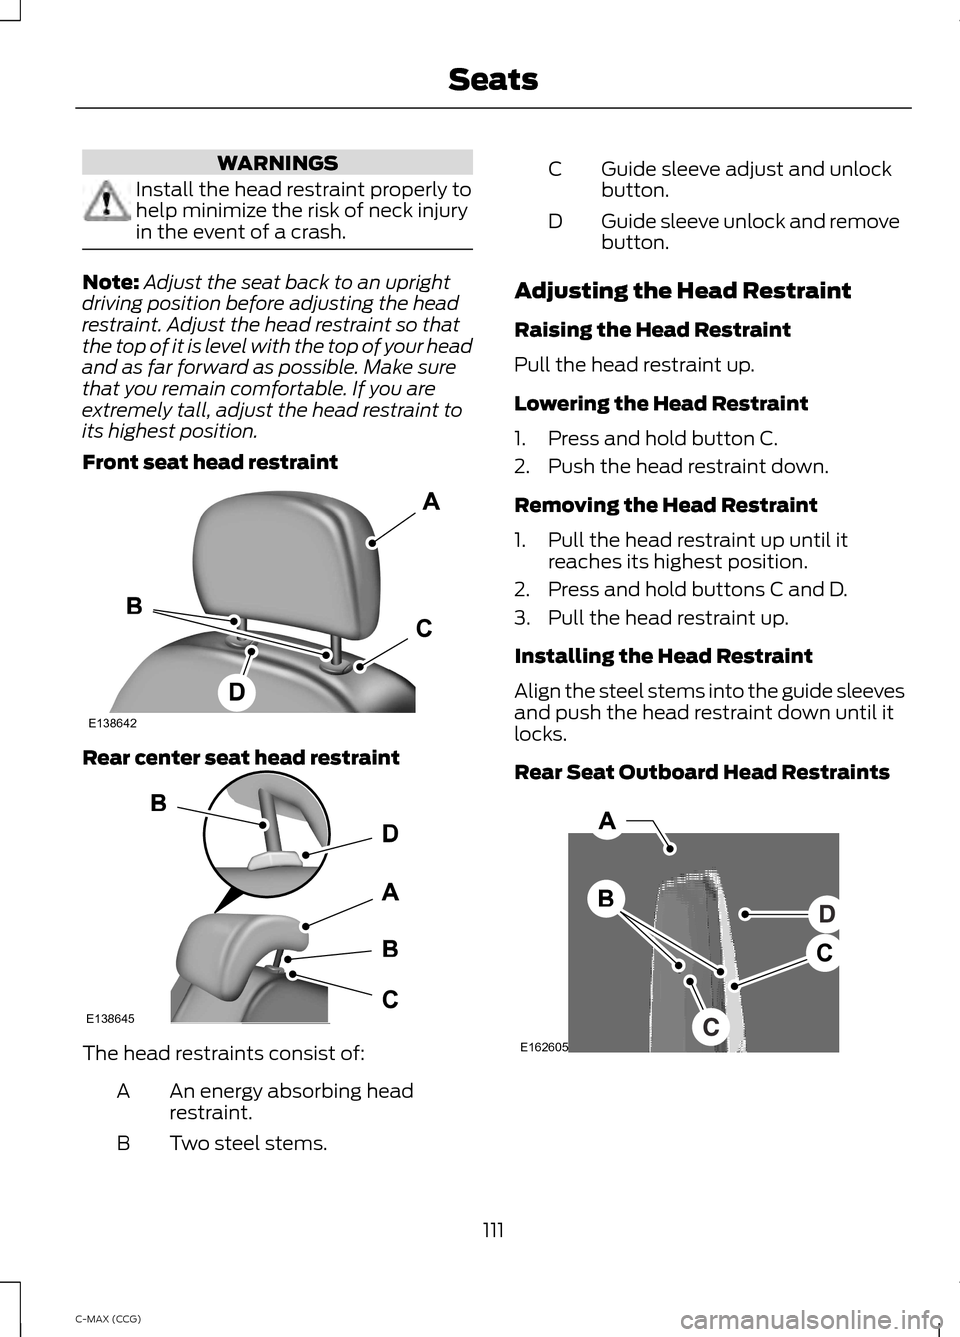 FORD C MAX HYBRID 2014 2.G Owners Manual WARNINGS
Install the head restraint properly to
help minimize the risk of neck injury
in the event of a crash.
Note:
Adjust the seat back to an upright
driving position before adjusting the head
restr